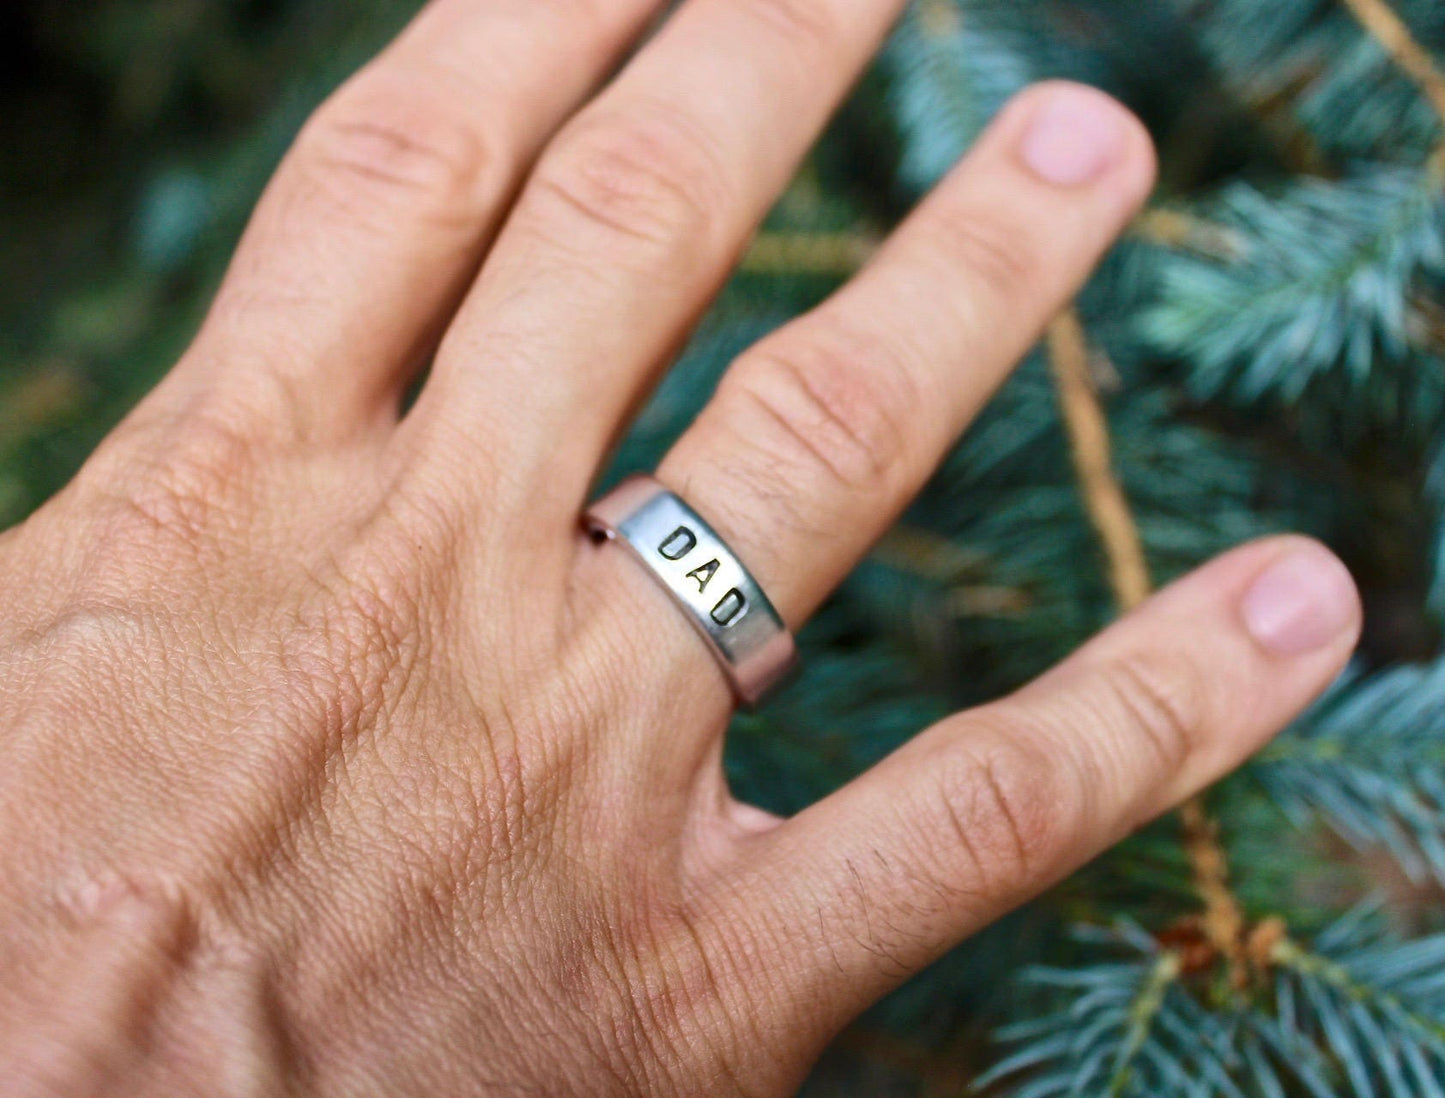 Aluminum, adjustable ring with “DAD” engraved